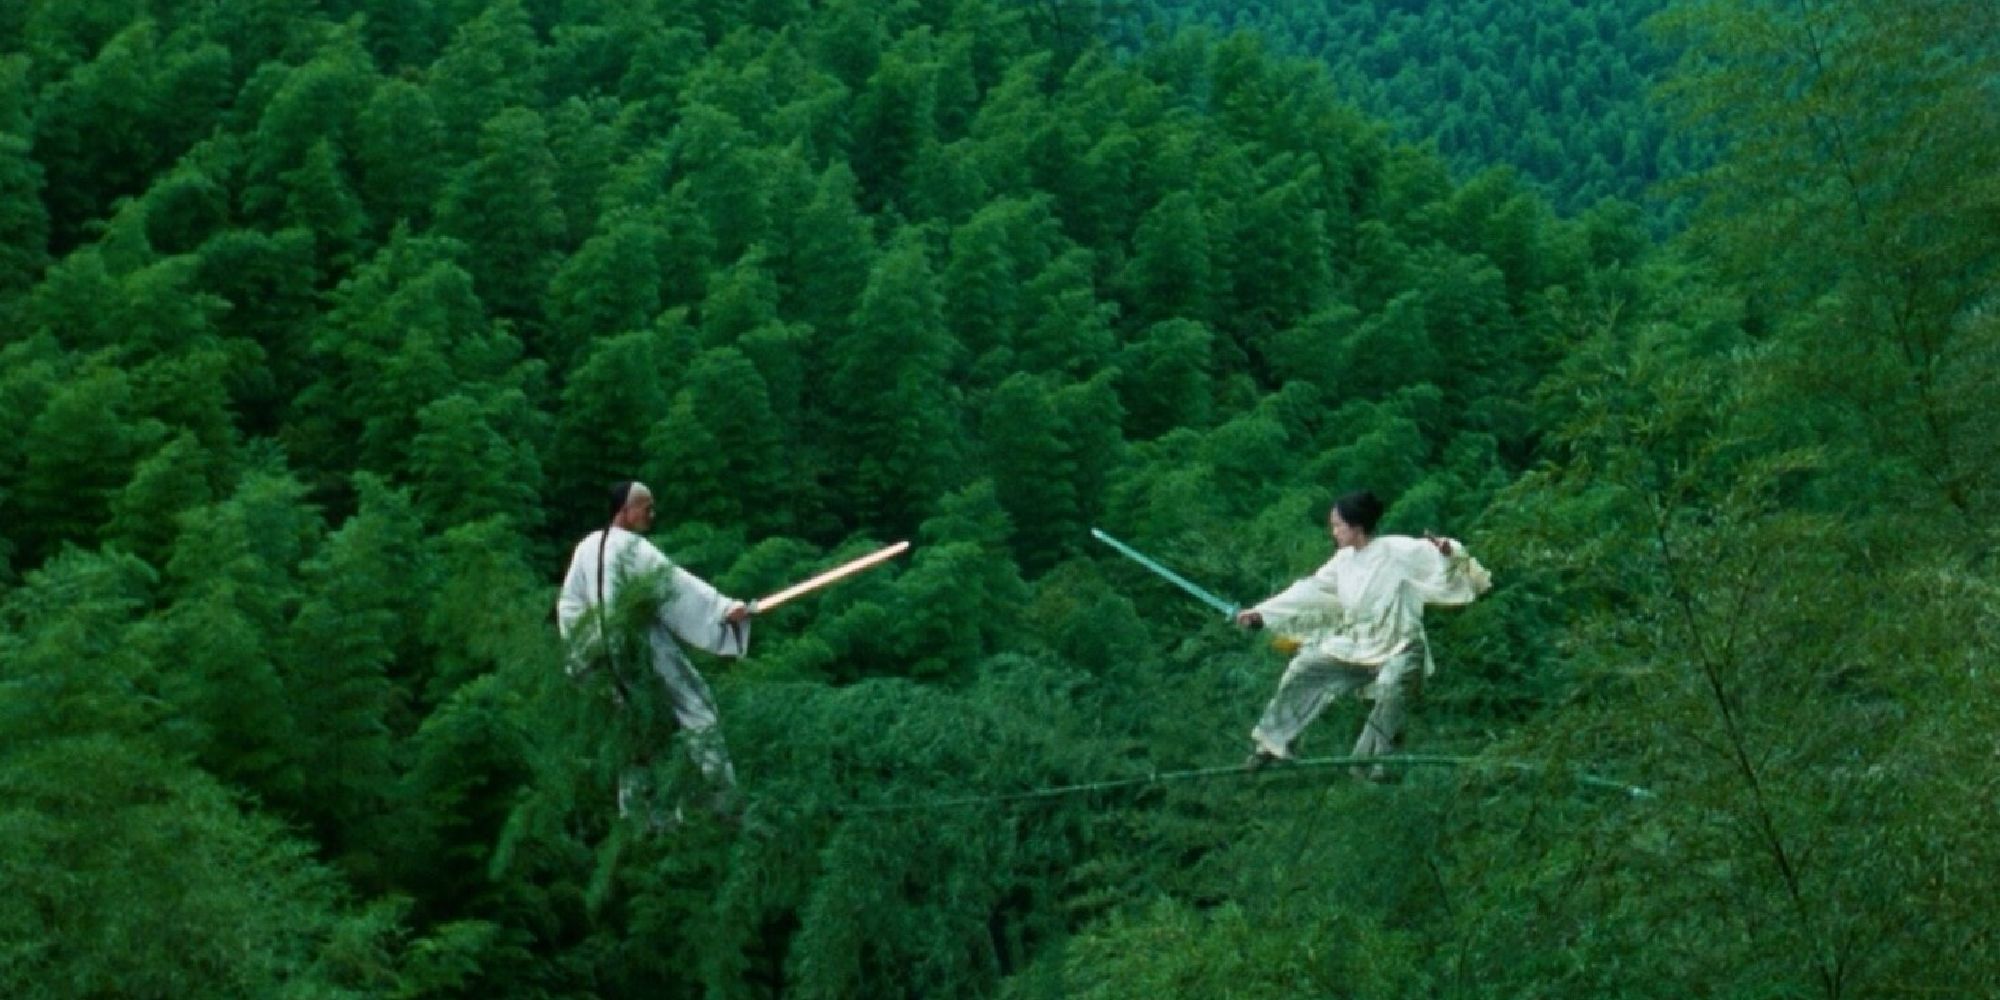 The cinematography of Crouching Tiger Hidden Dragon